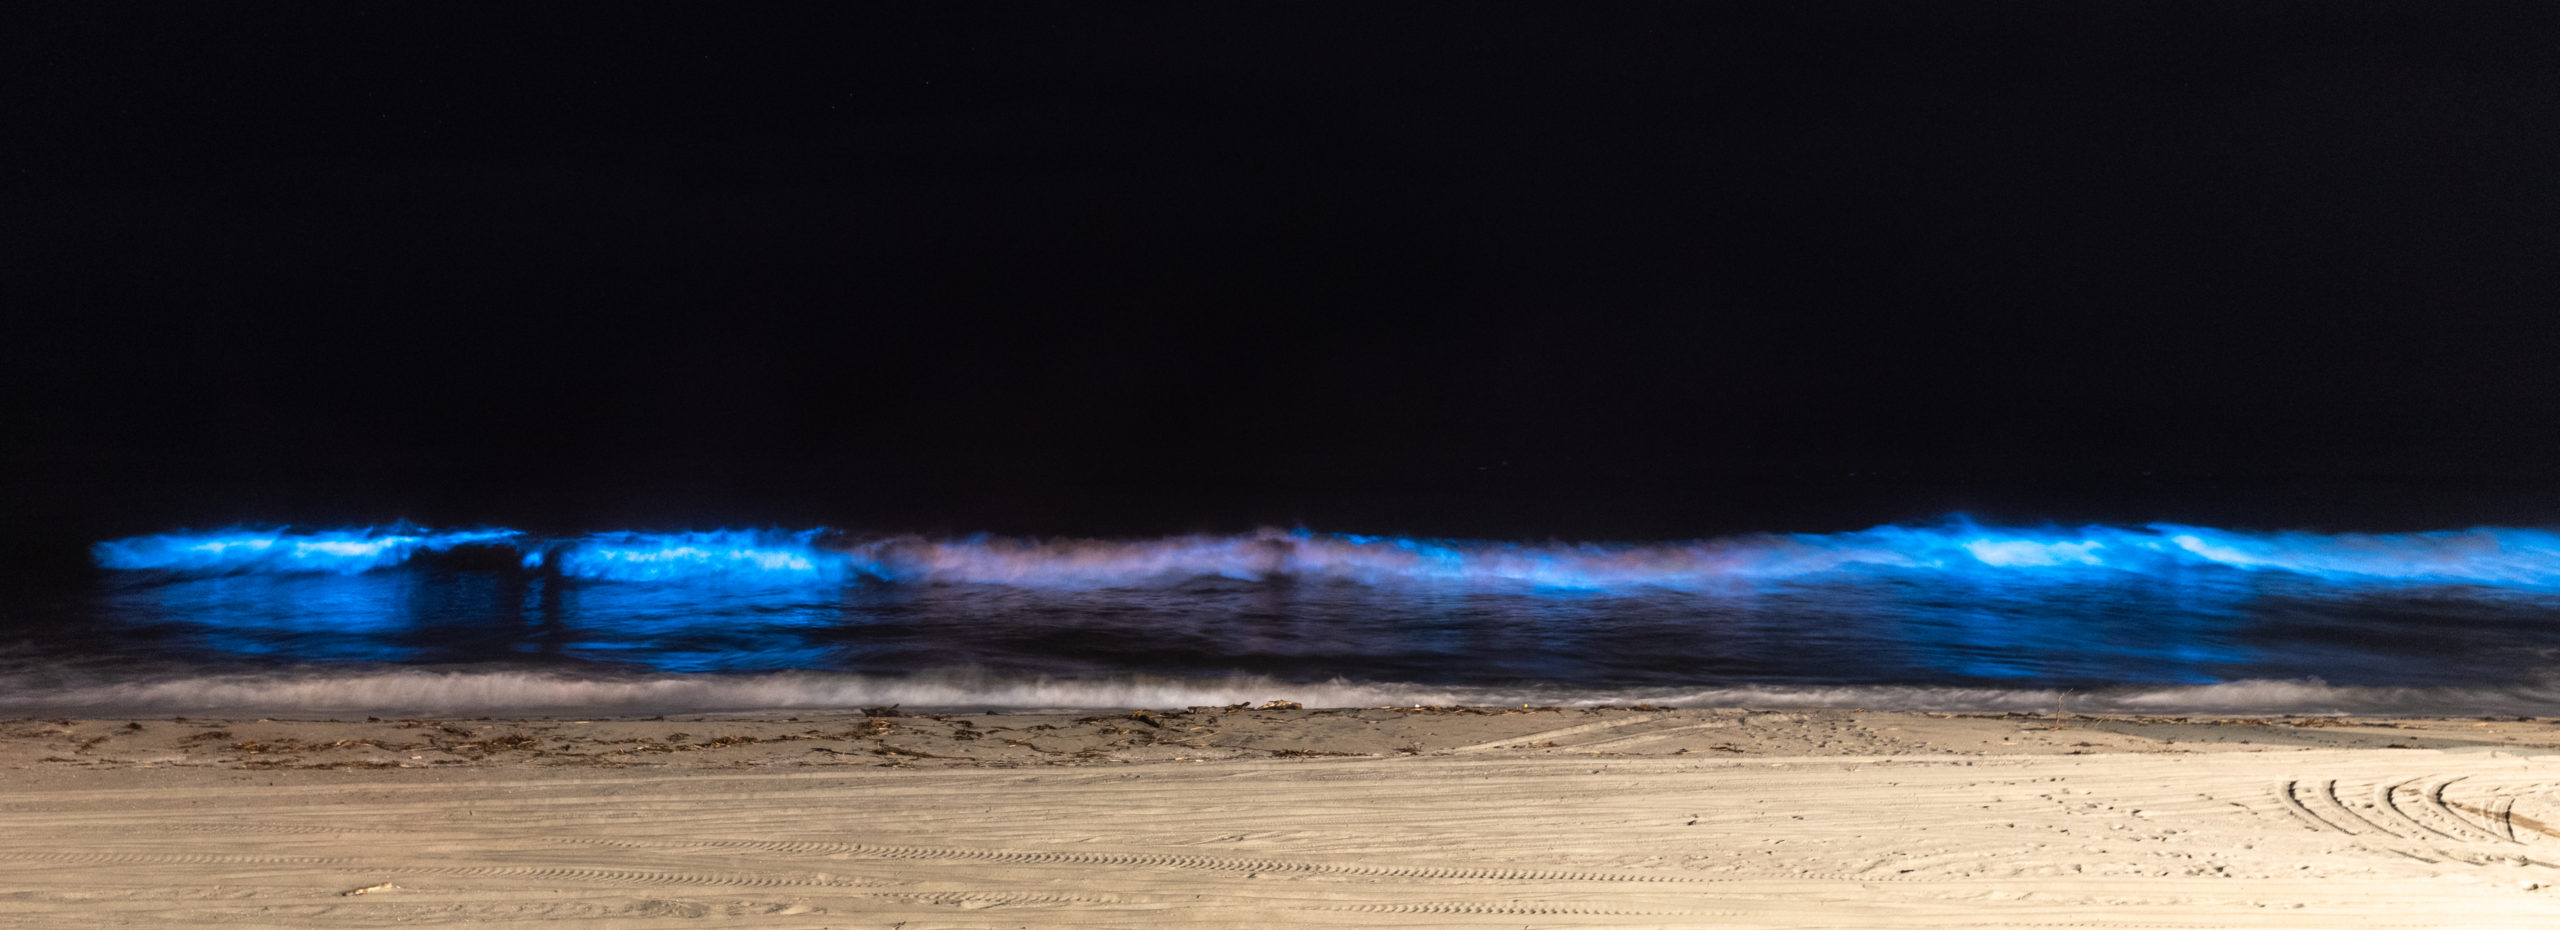 How to Photograph Bioluminescence - Adam's Trail Notes